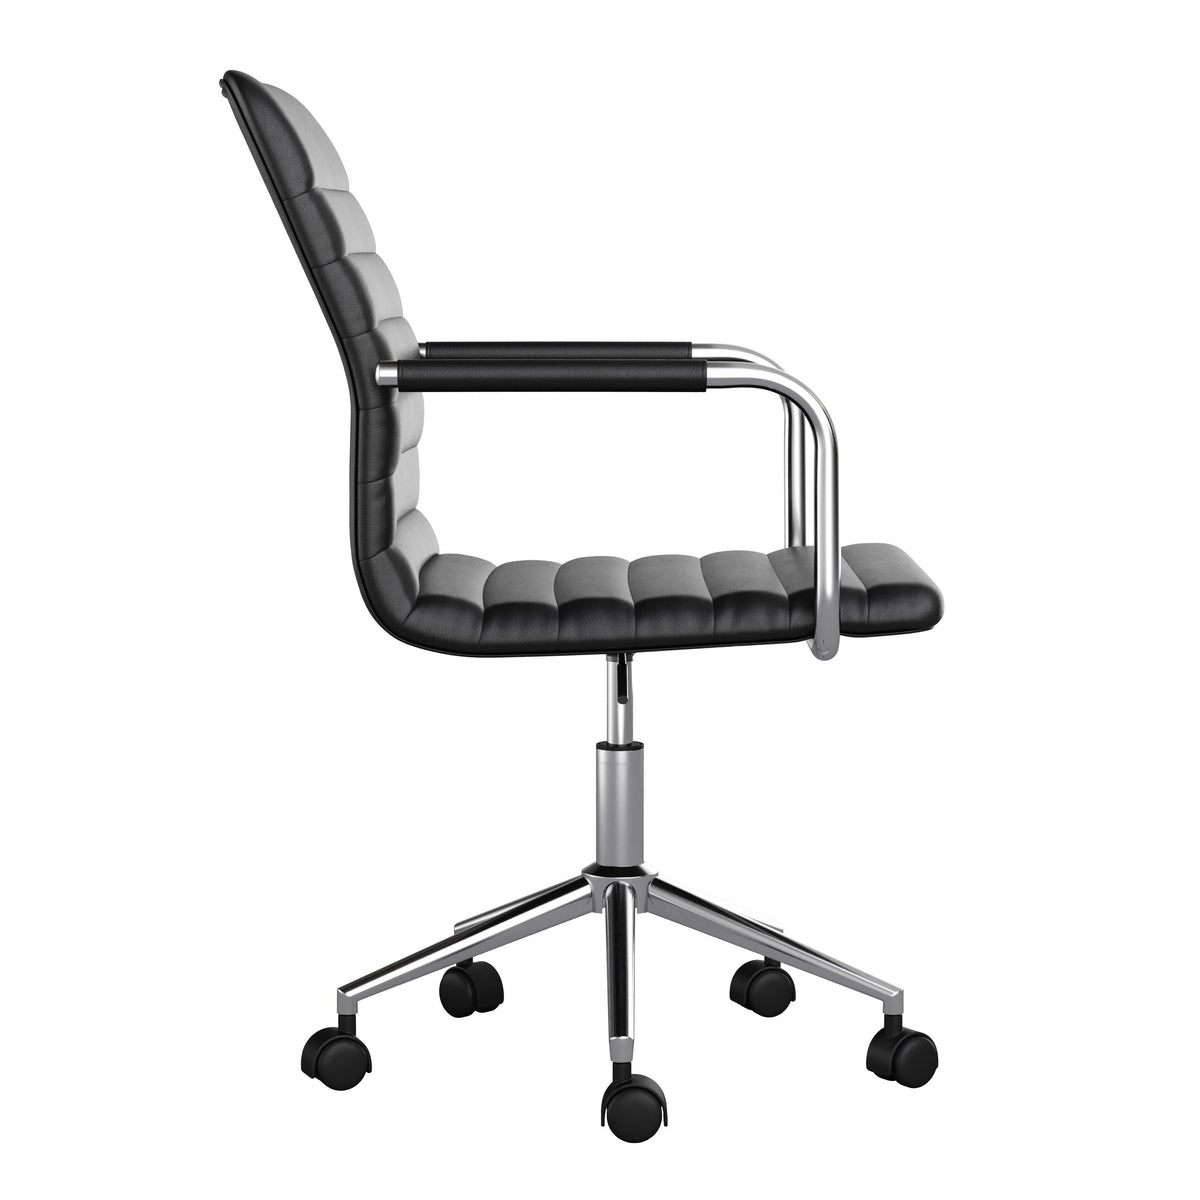 Black Faux Leather/Polished Nickel |#| Faux Leather Swivel Home Office Chair with Integrated Armrests-Black/Nickel